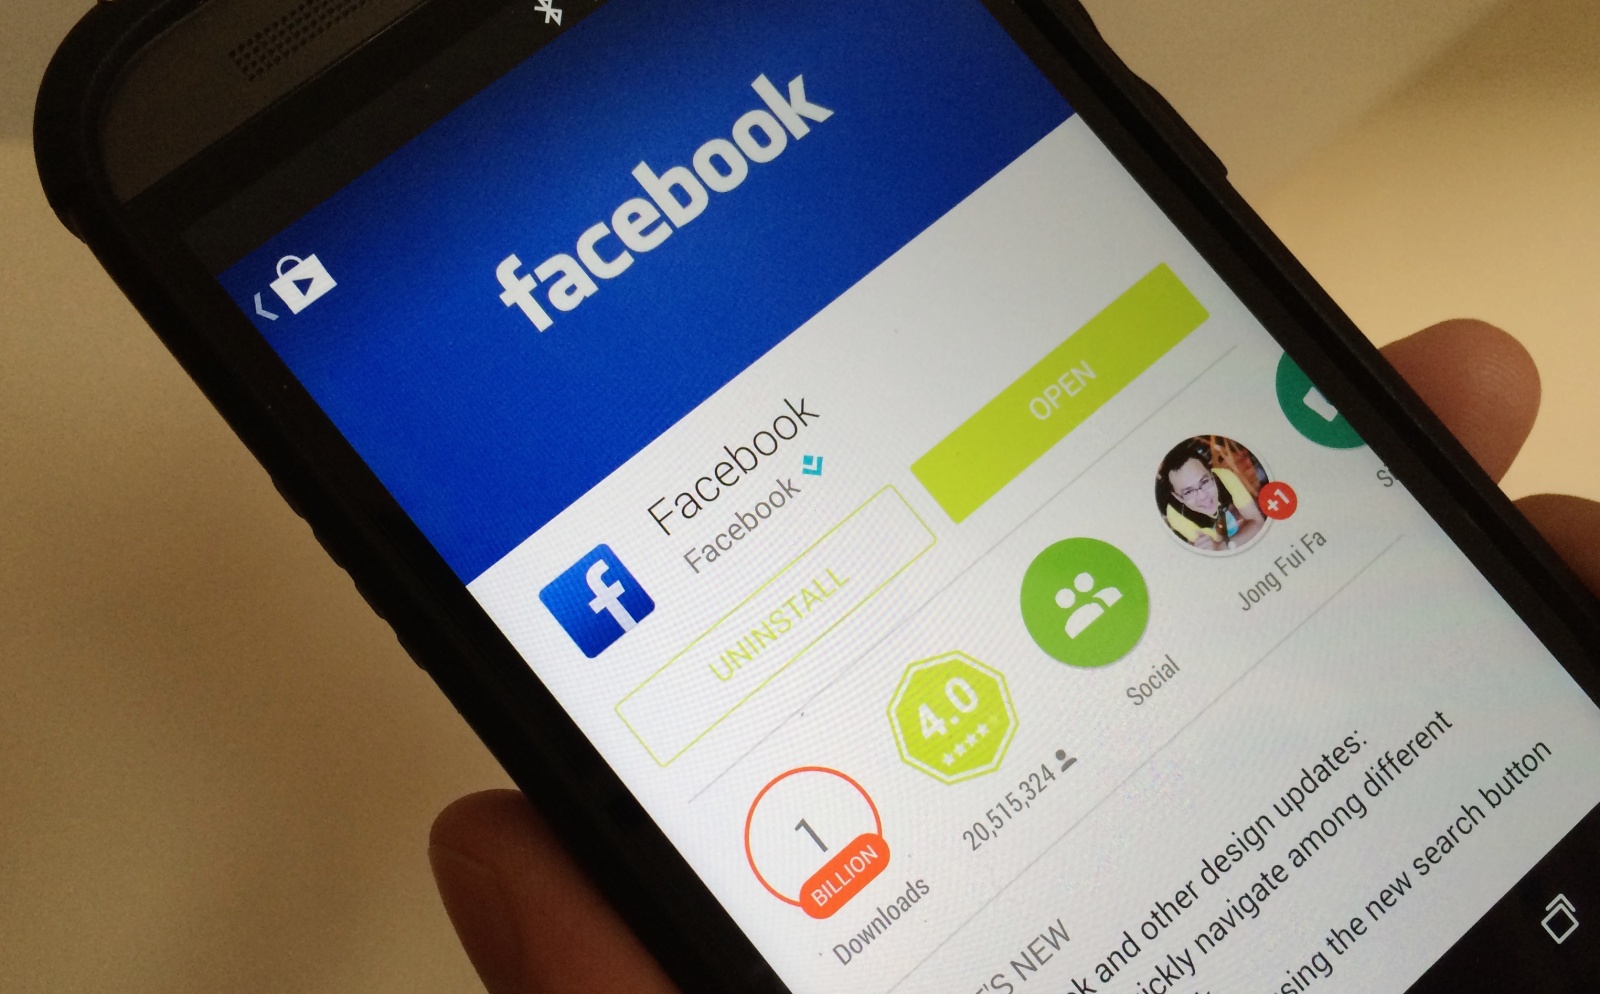 facebook-orders-employees-to-switch-to-android-image-cultofandroidcomwp-contentuploads201409IMG_2466-jpg